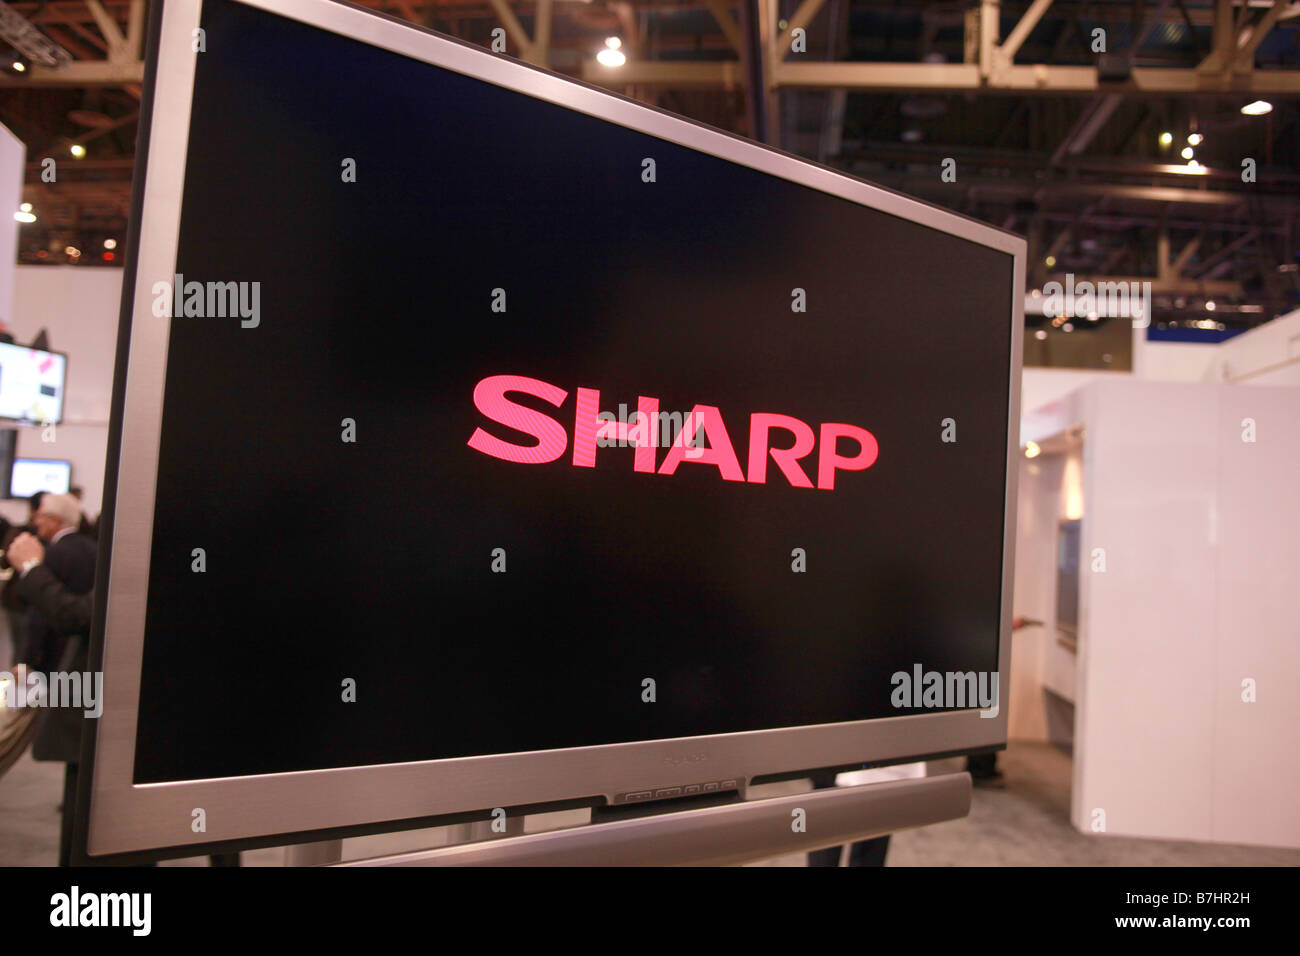 Jan 8, 2009 - Las Vegas, Nevada, USA - Sharp Corporation displays their 65-inch XS1 model LCD monitor at CES electronics show. Stock Photo